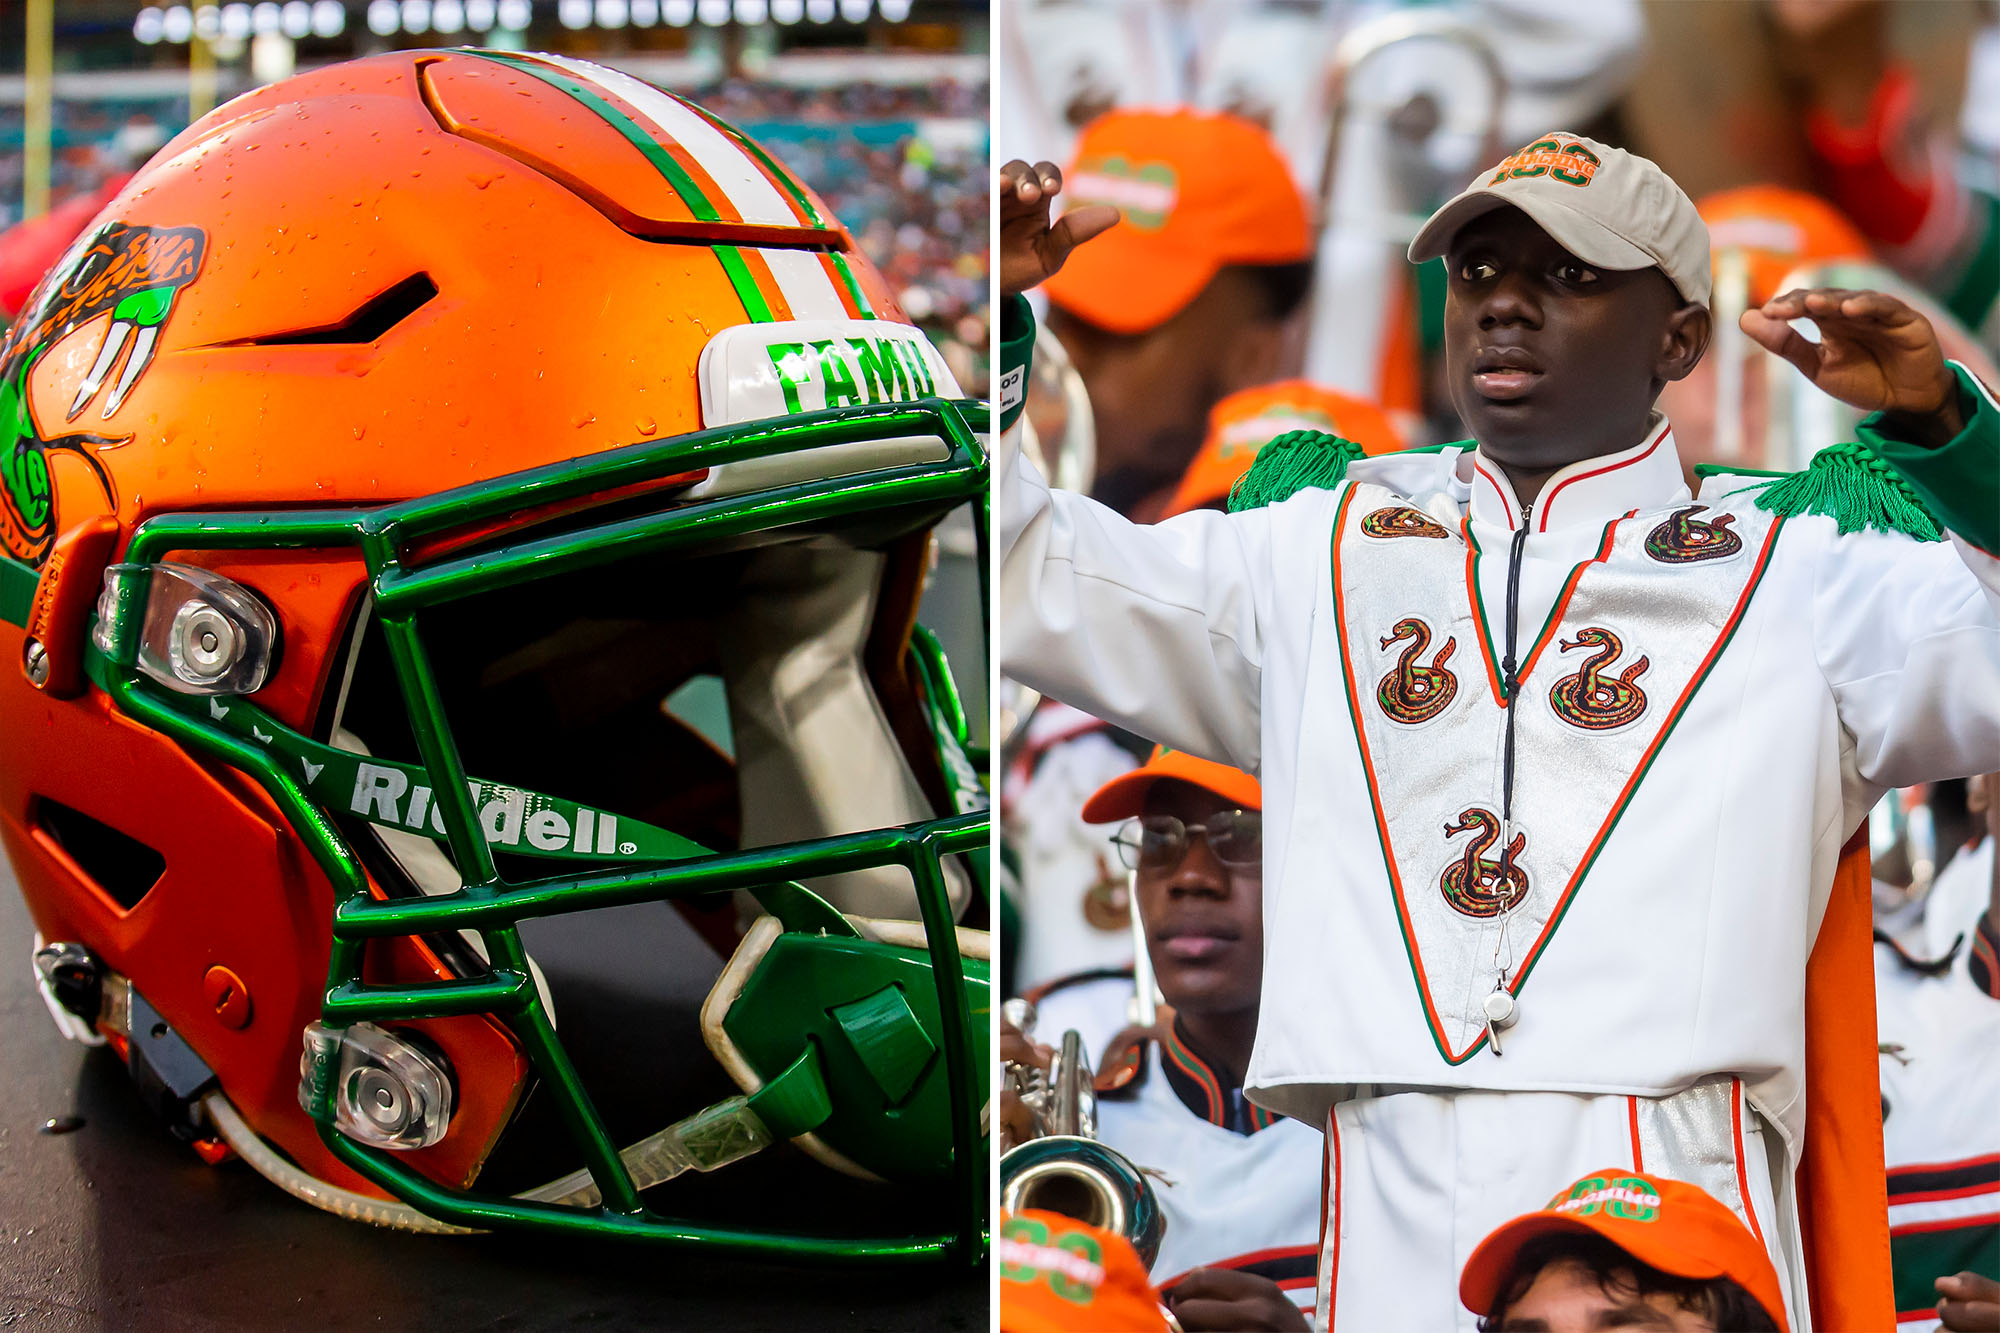 Florida A&M will be without 20 of its players for its season-opener against North Carolina on Saturday.